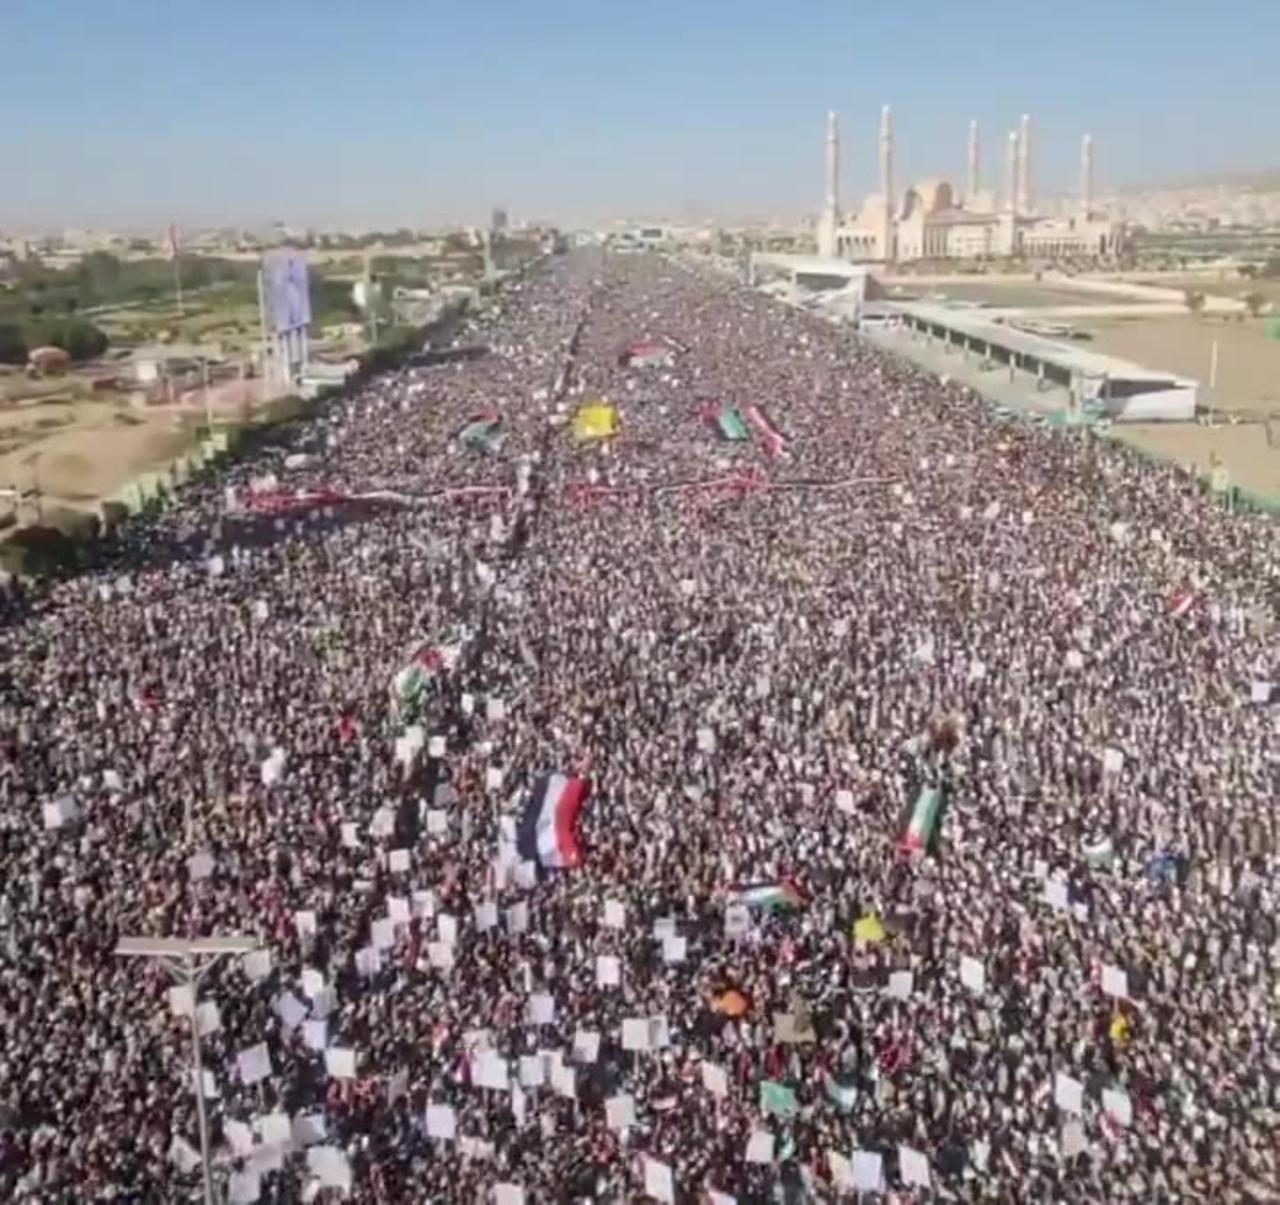 Humongous protest in Yemen after Biden and the Brits conducted air strikes